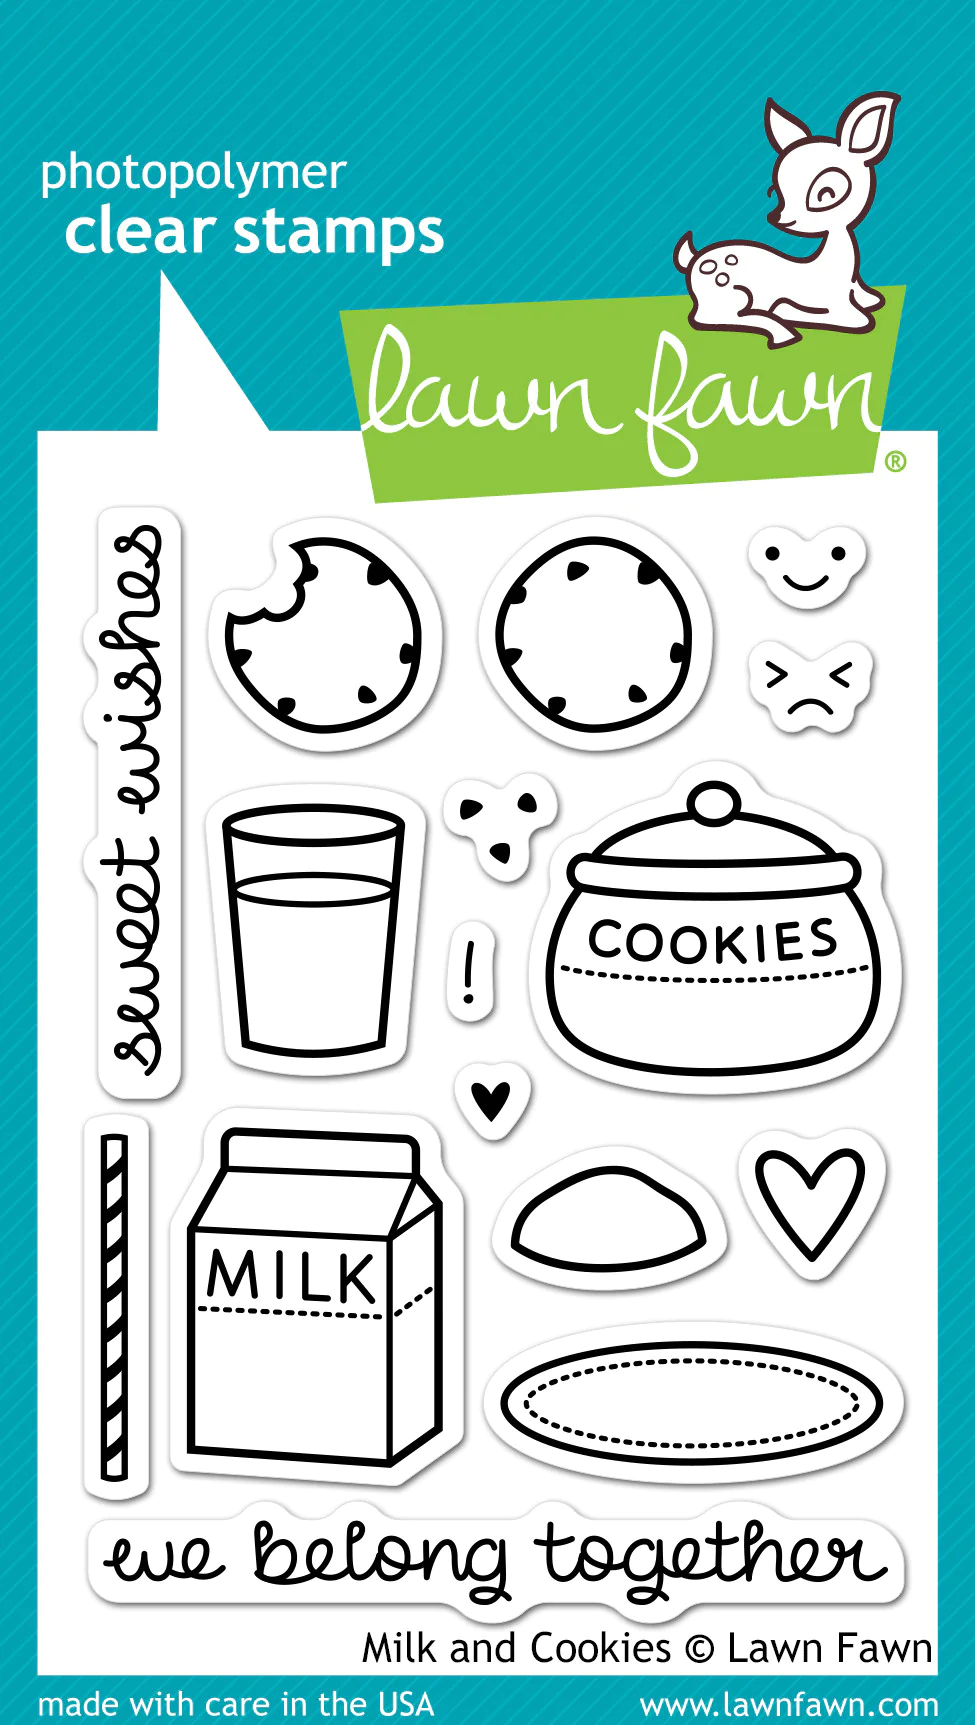 Milk and Cookies stamps